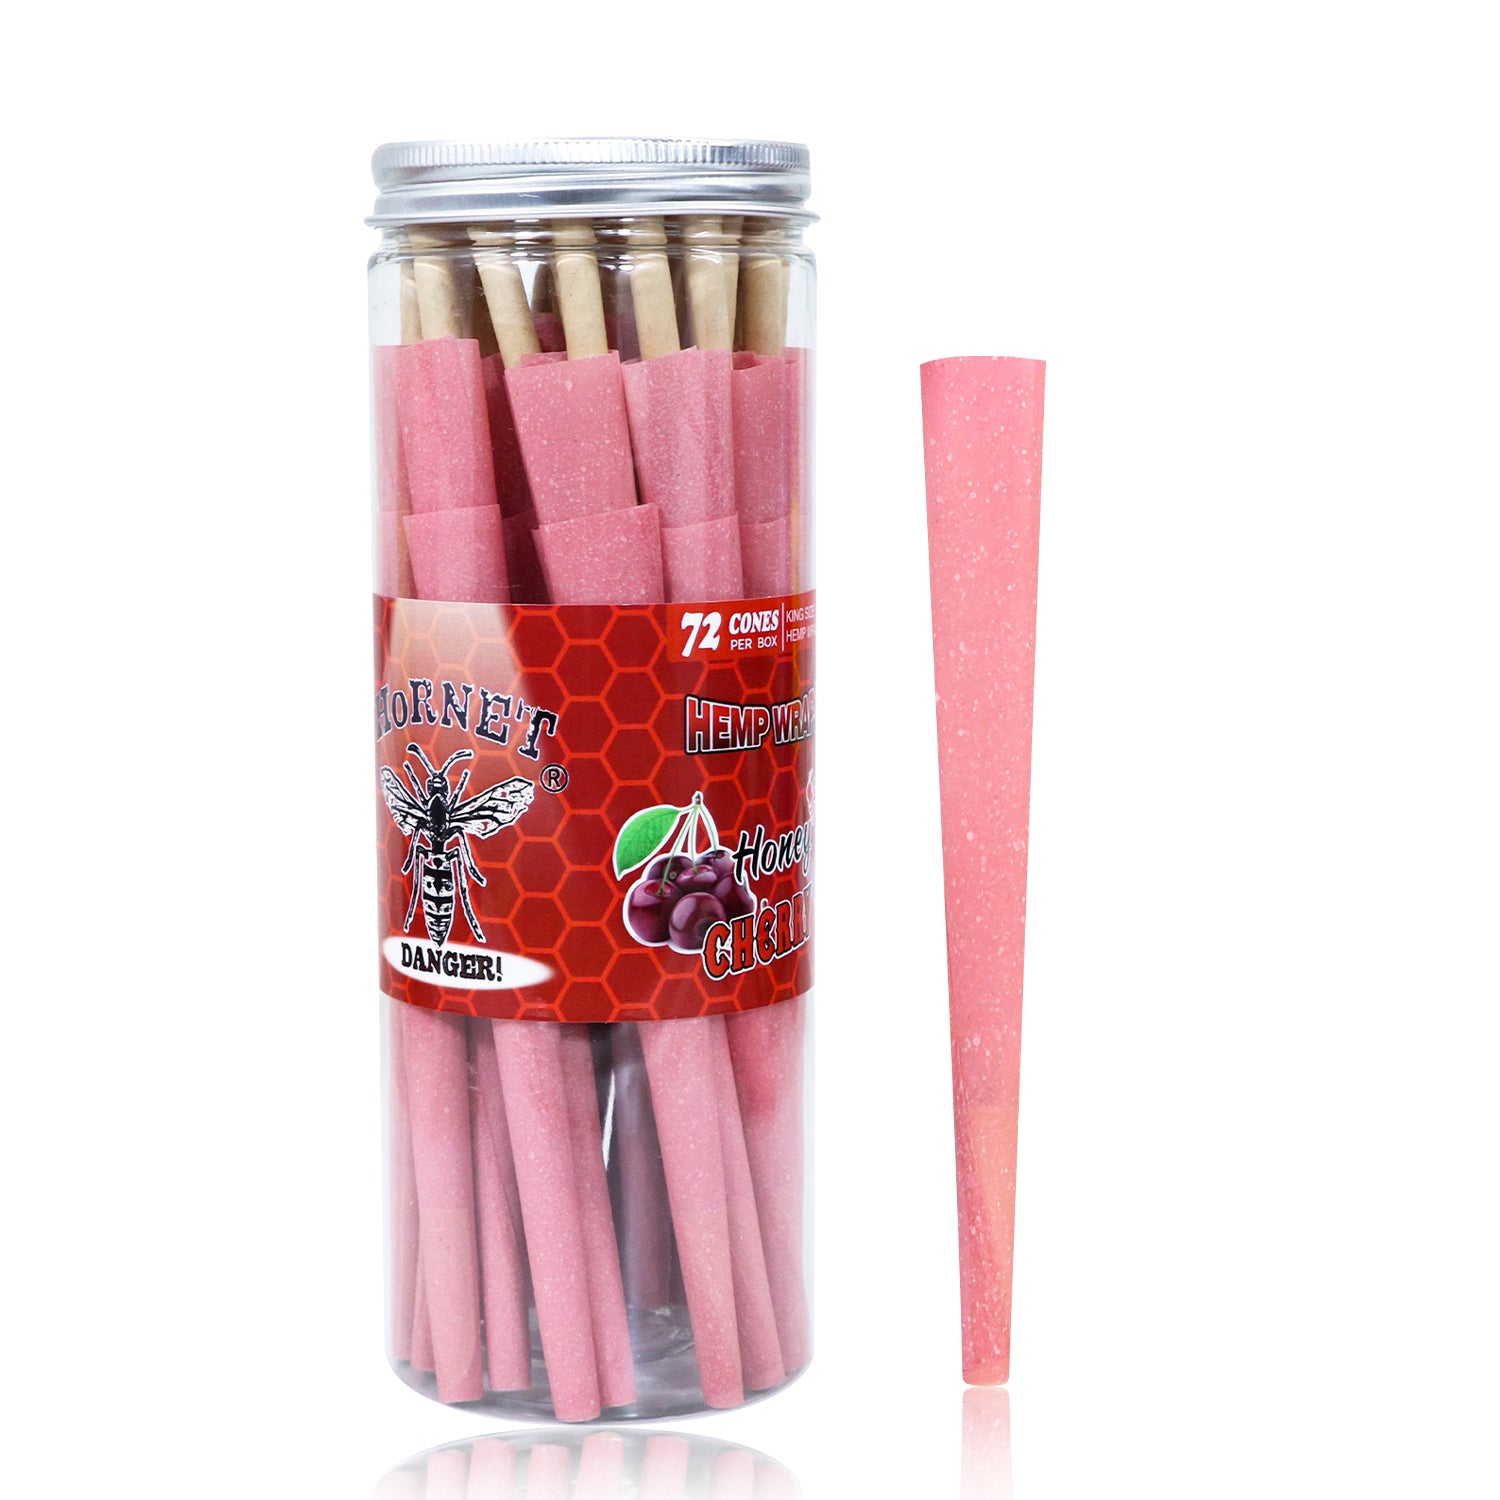 HORNET Cherry Flavored Pink Pre Rolled Cones, King Size Pre Rolled Rolling Paper with tips, Slow Burning Rolling Cones & load, 72 PCS / Jar